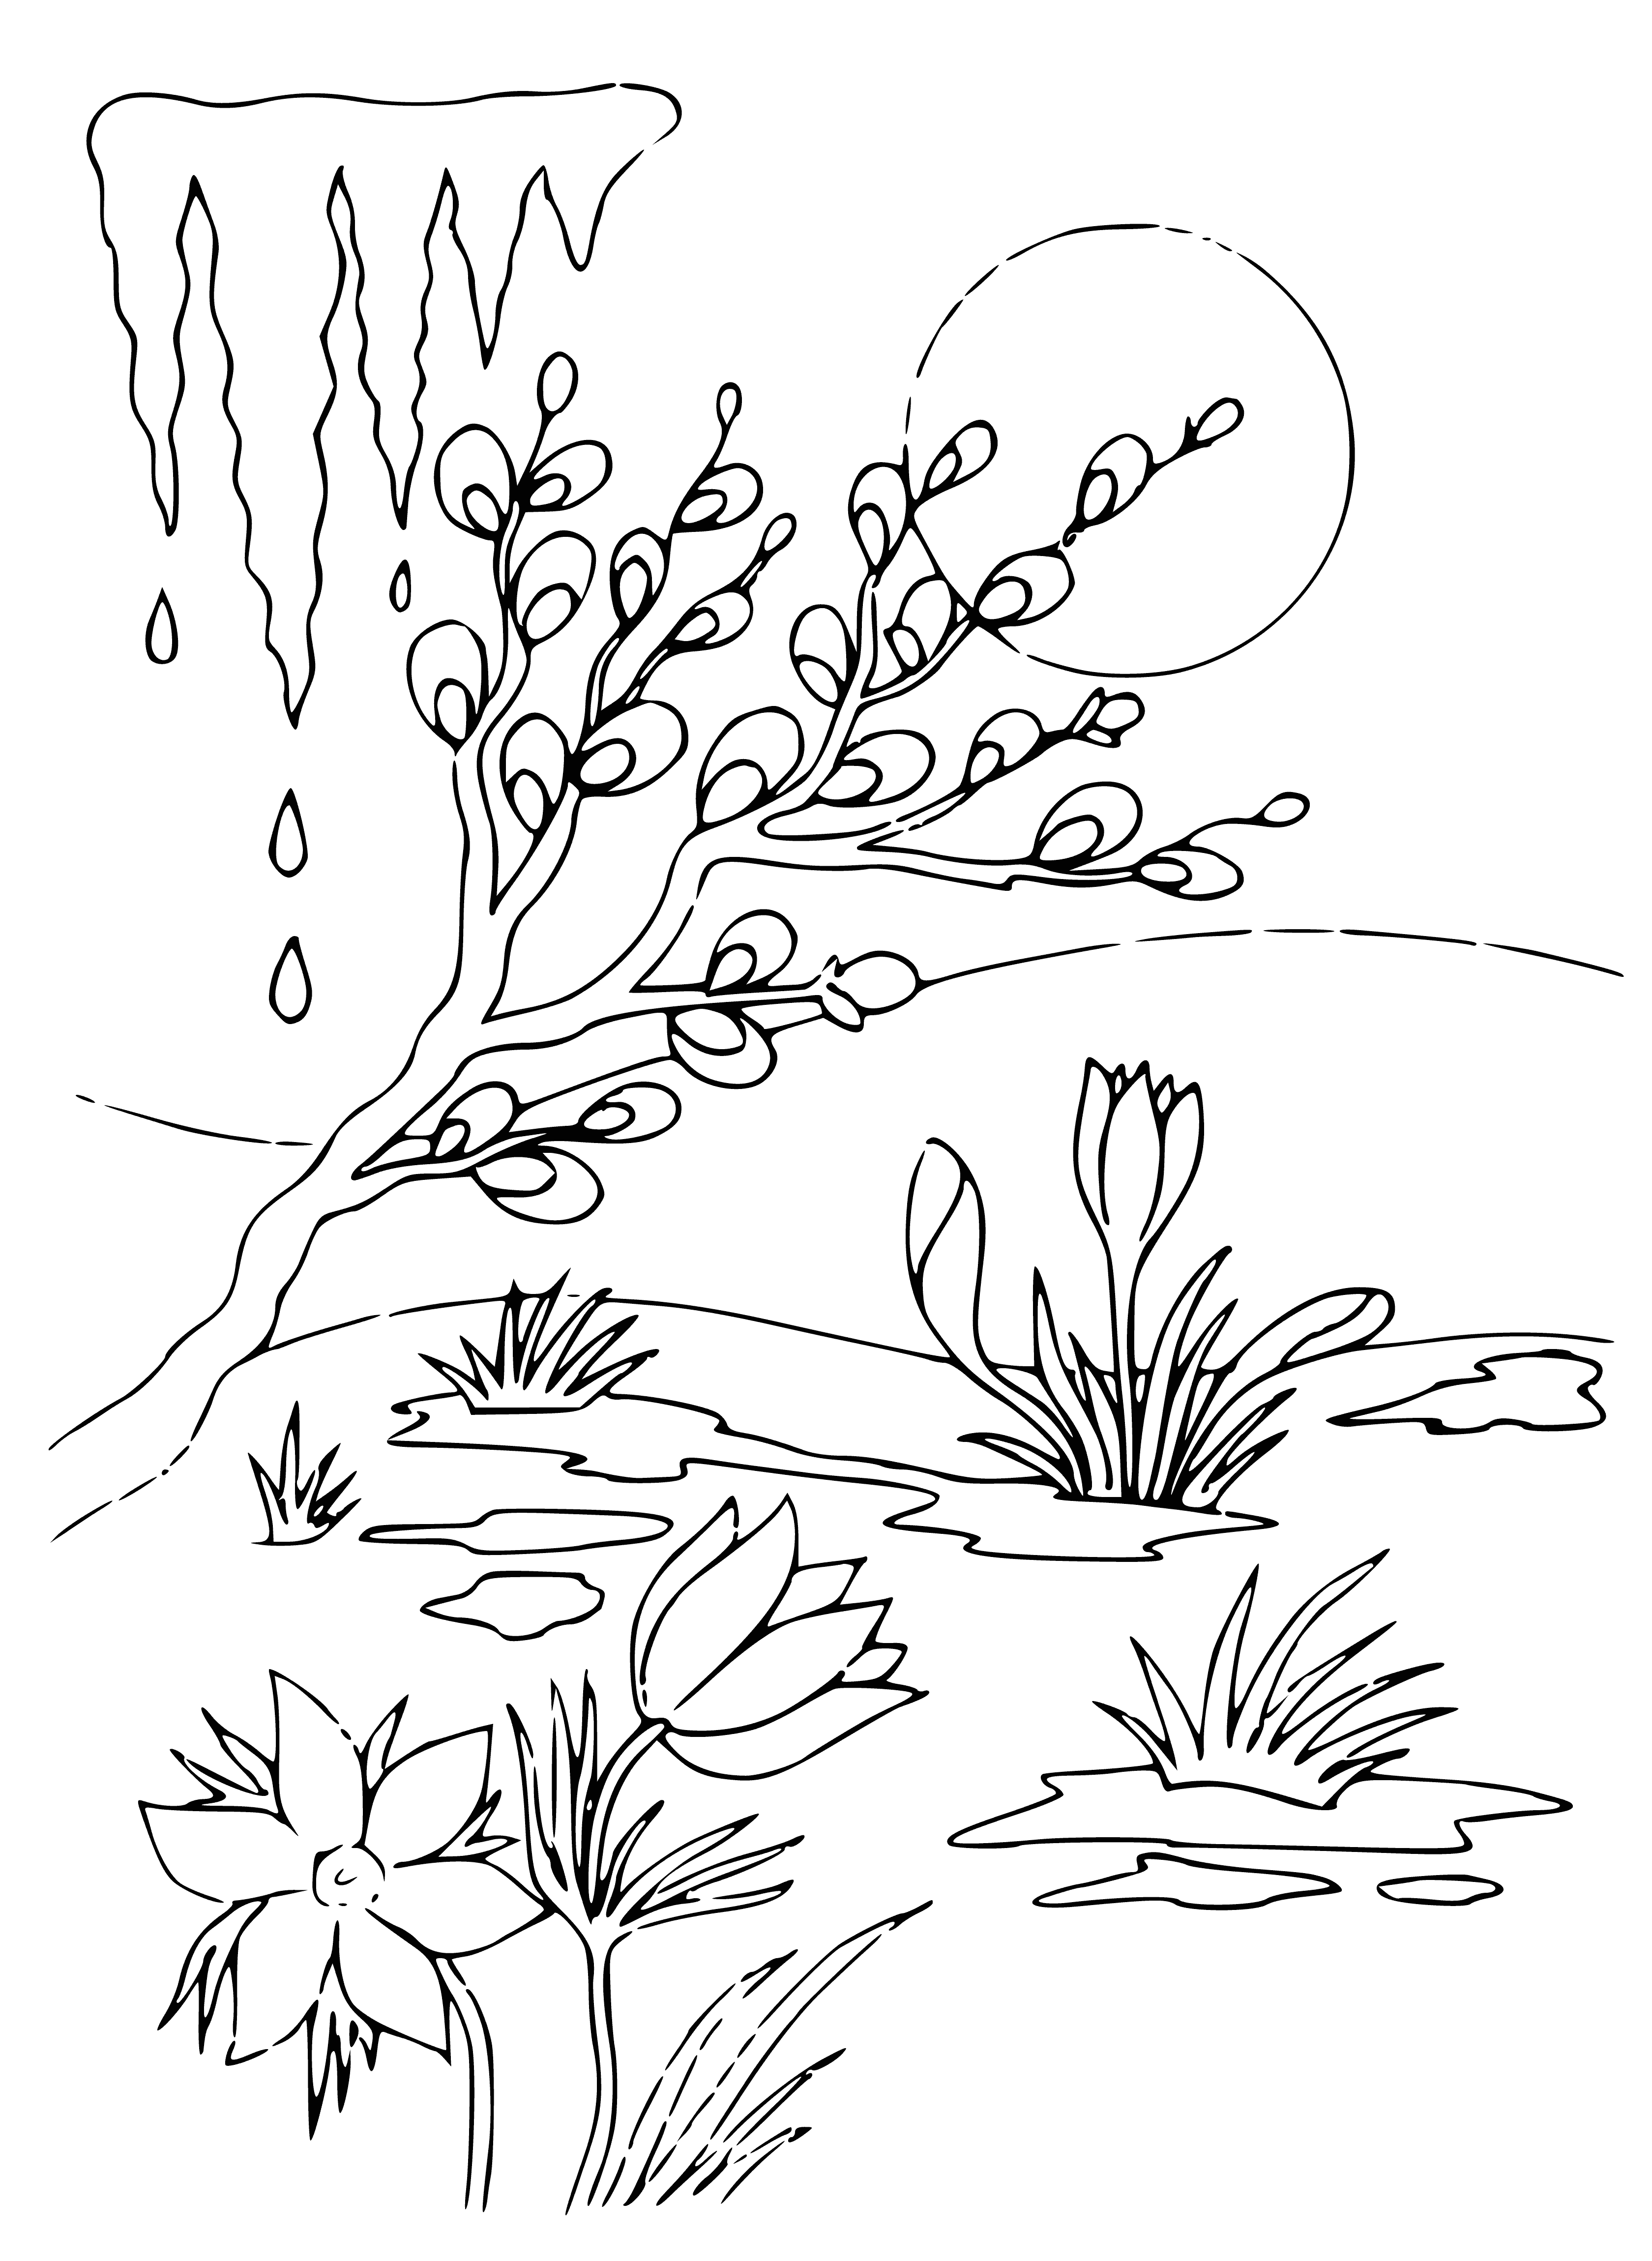 coloring page: Spring is here! The sky's blue, snow's melting, trees budding, flowers blooming, birds singing, butterflies fluttering, bees buzzing, and frogs croaking. #springtime